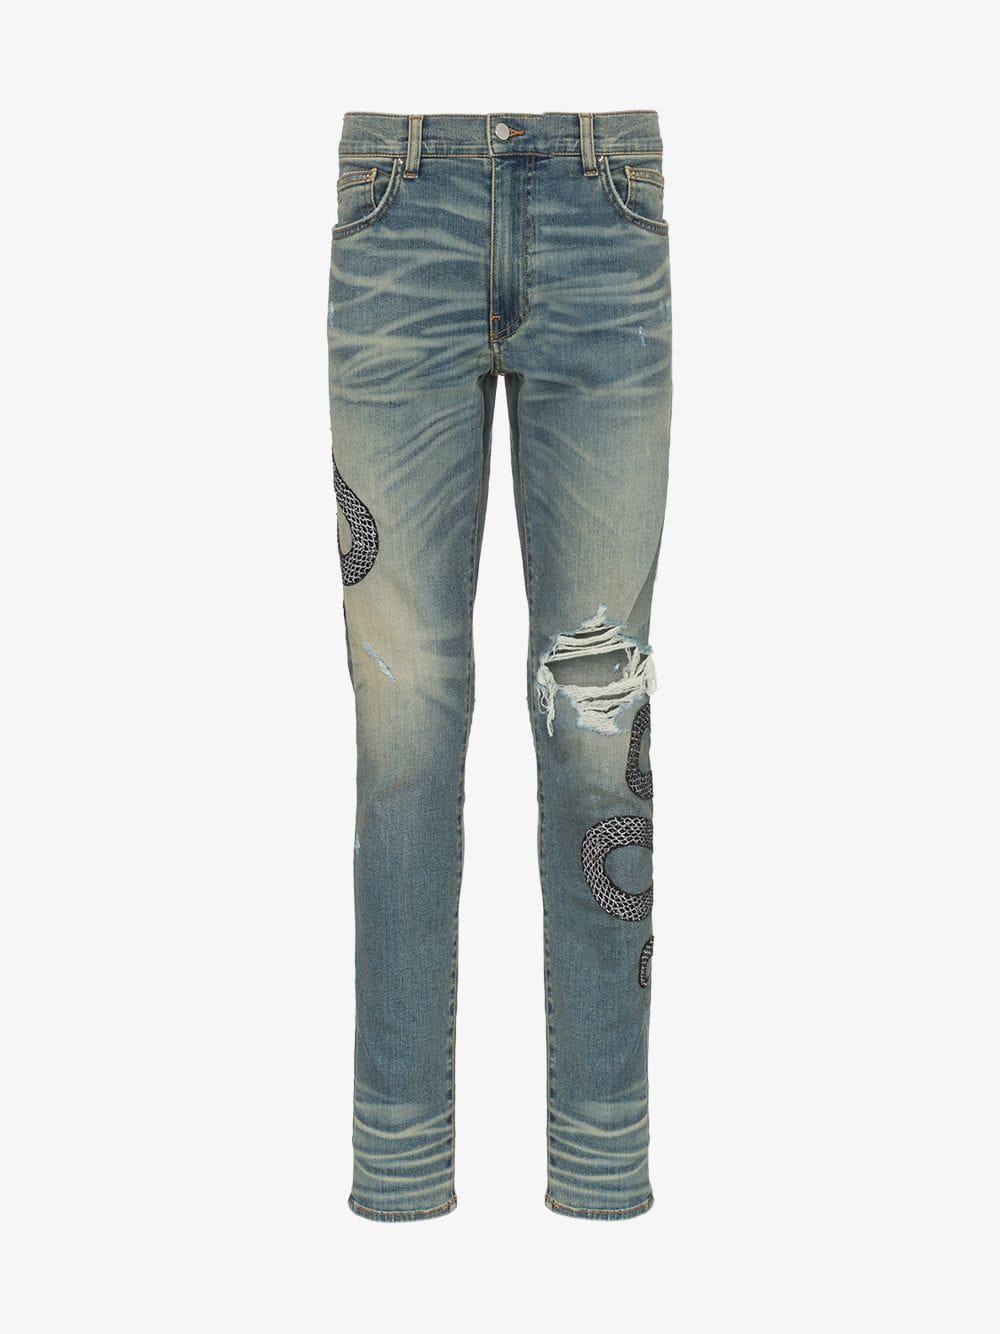 Amiri Denim Snake Embroidered Distressed Jeans in Blue for Men - Lyst